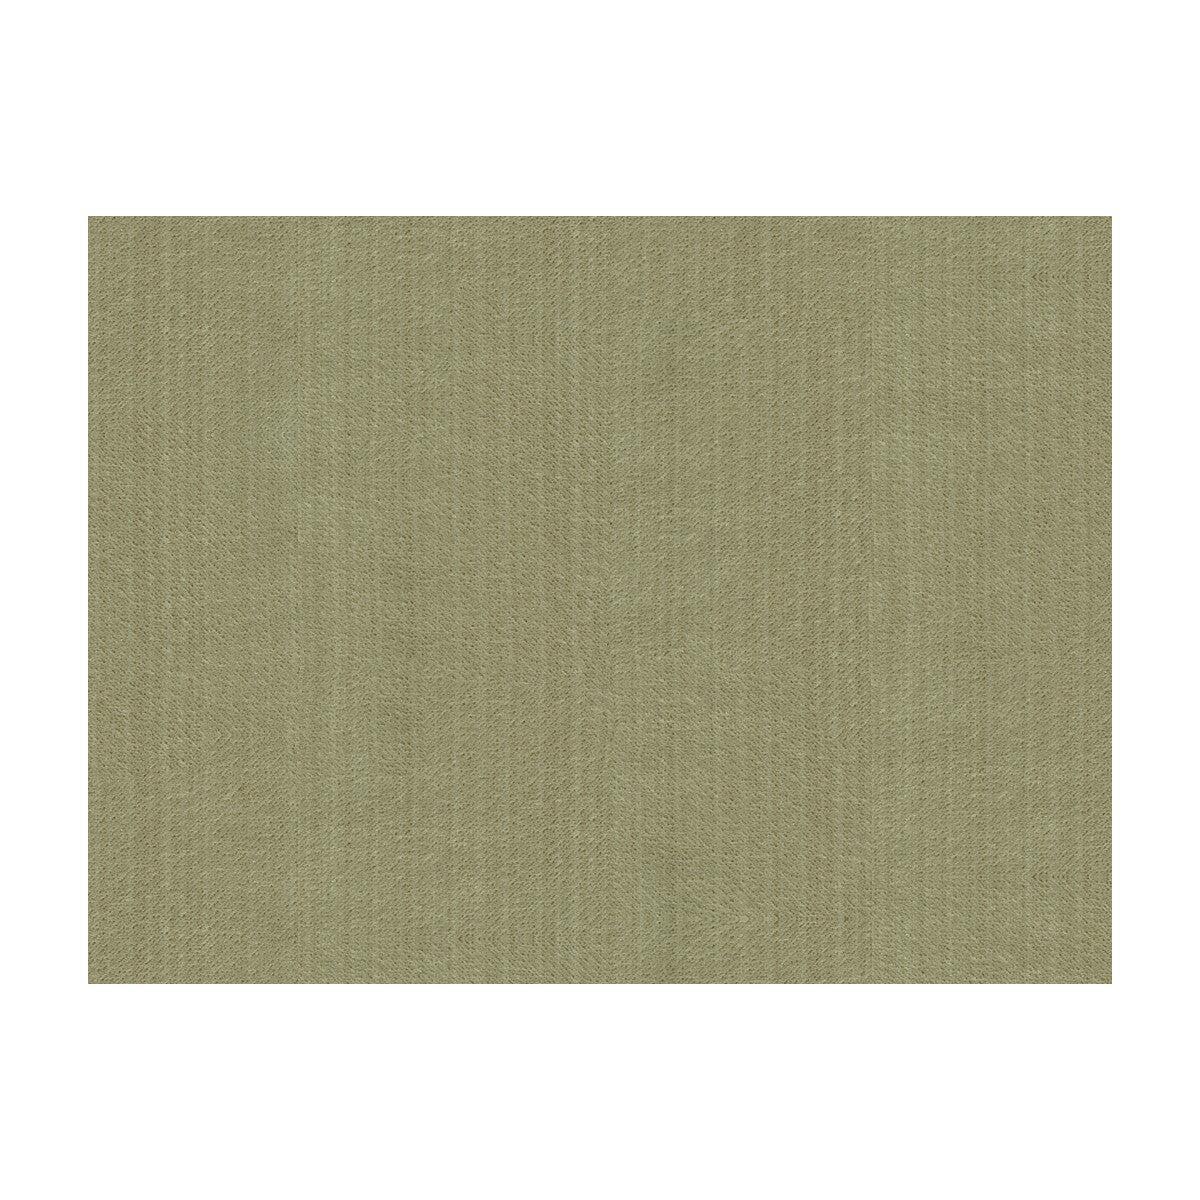 Kravet Contract fabric in 33353-521 color - pattern 33353.521.0 - by Kravet Contract in the Gis collection